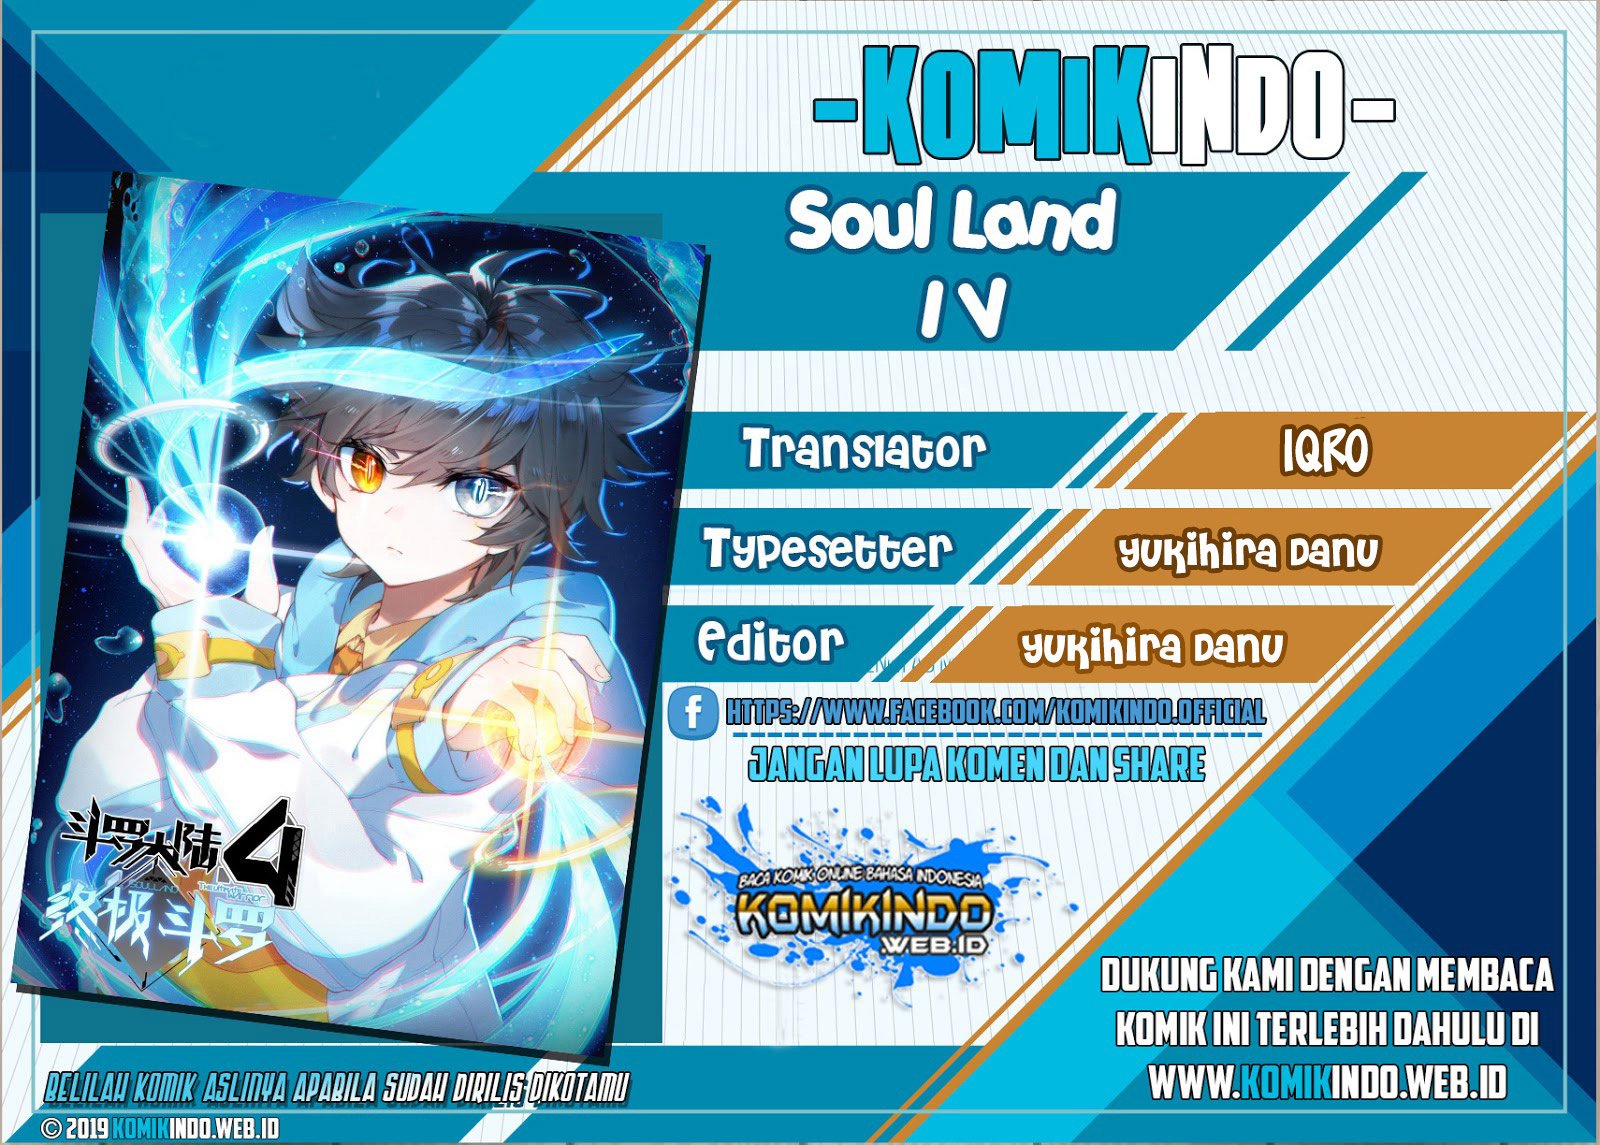 Soul Land IV – The Ultimate Combat Chapter 41